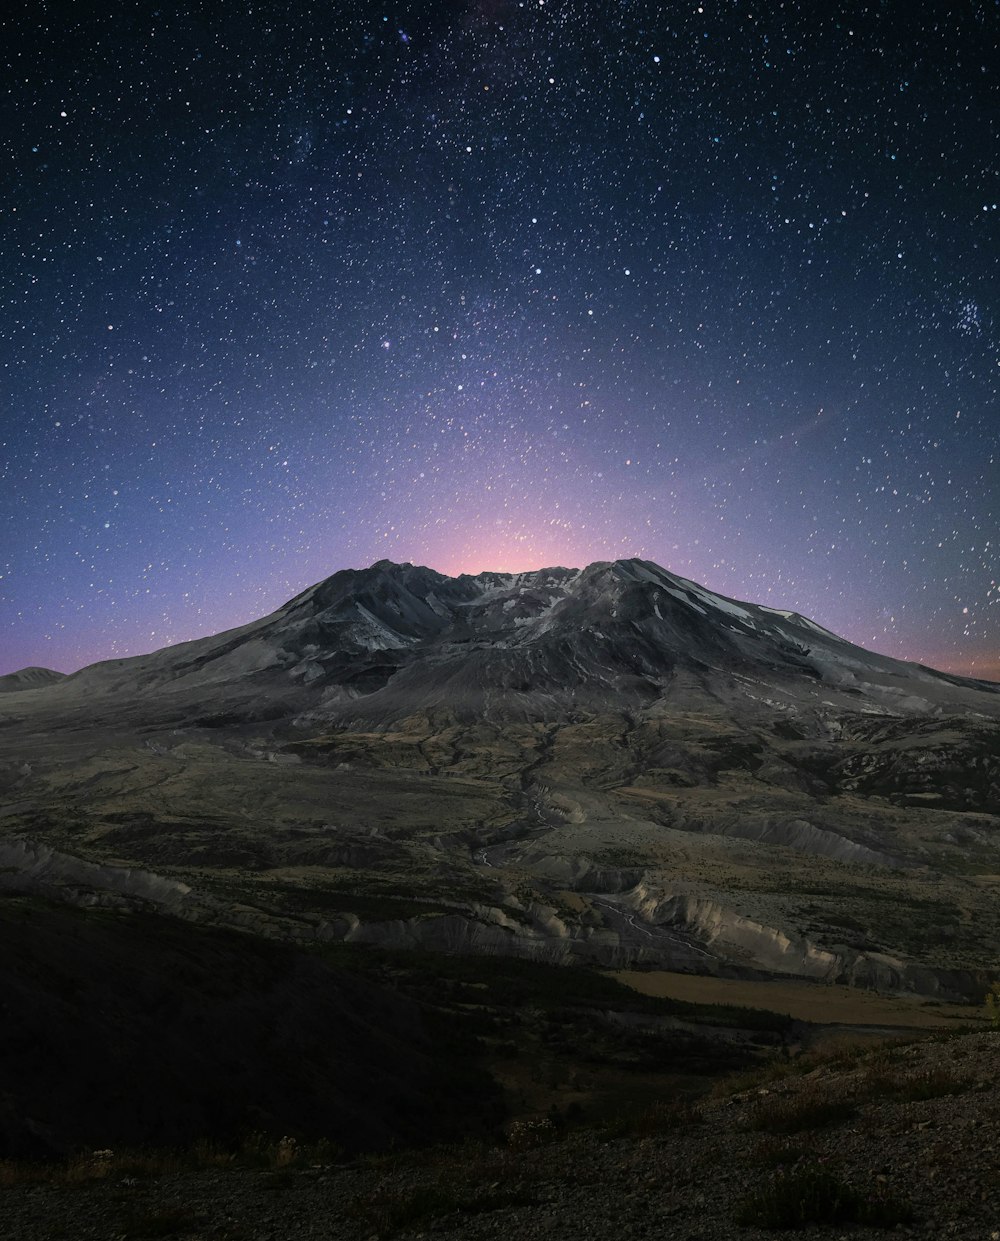 snow-capped mountain during night time with stars